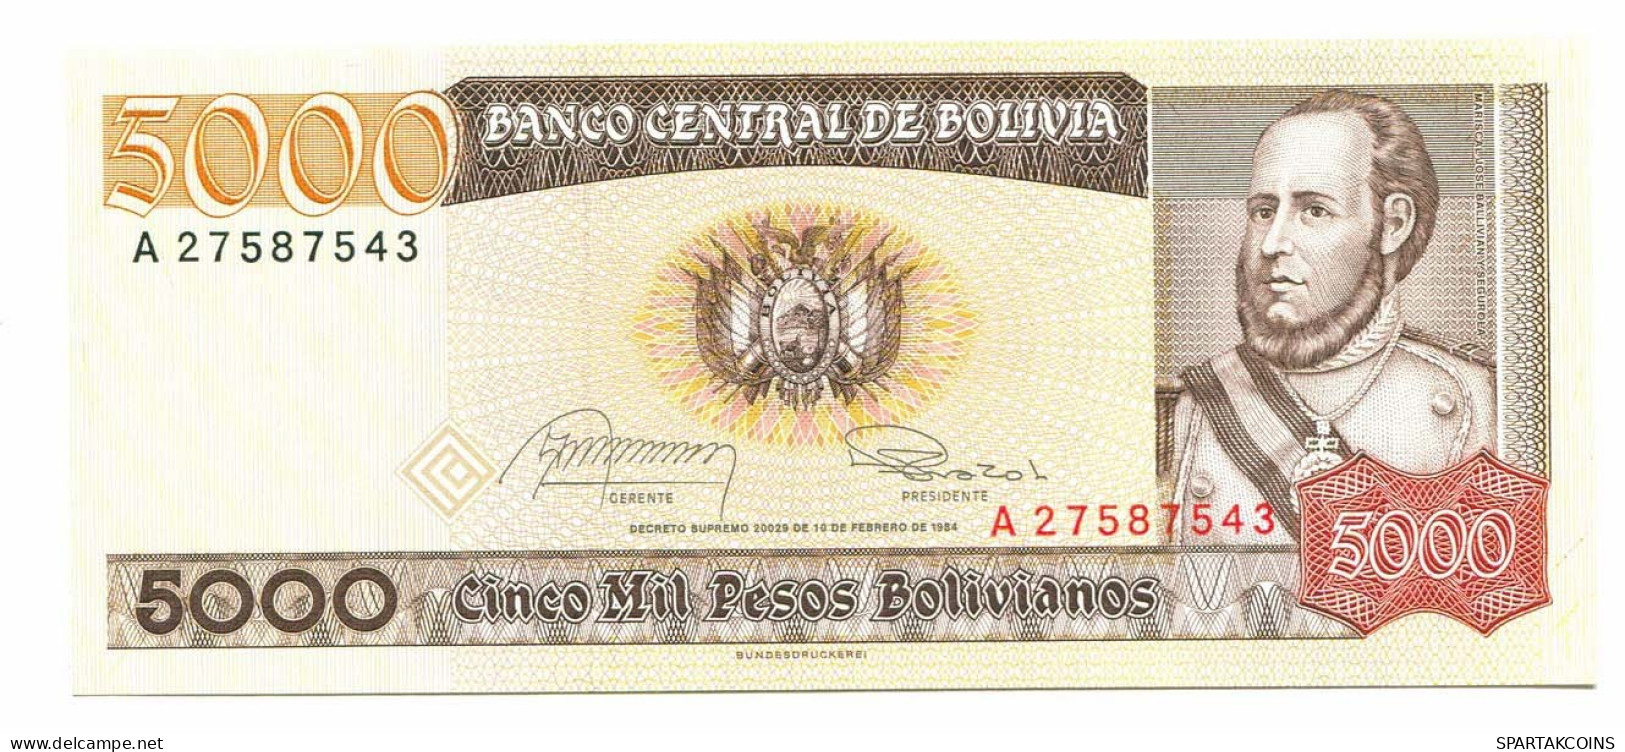 BOLIVIA 5000 PESOS BOLIVIANOS 1984 AUNC Paper Money Banknote #P10809.4 - [11] Local Banknote Issues